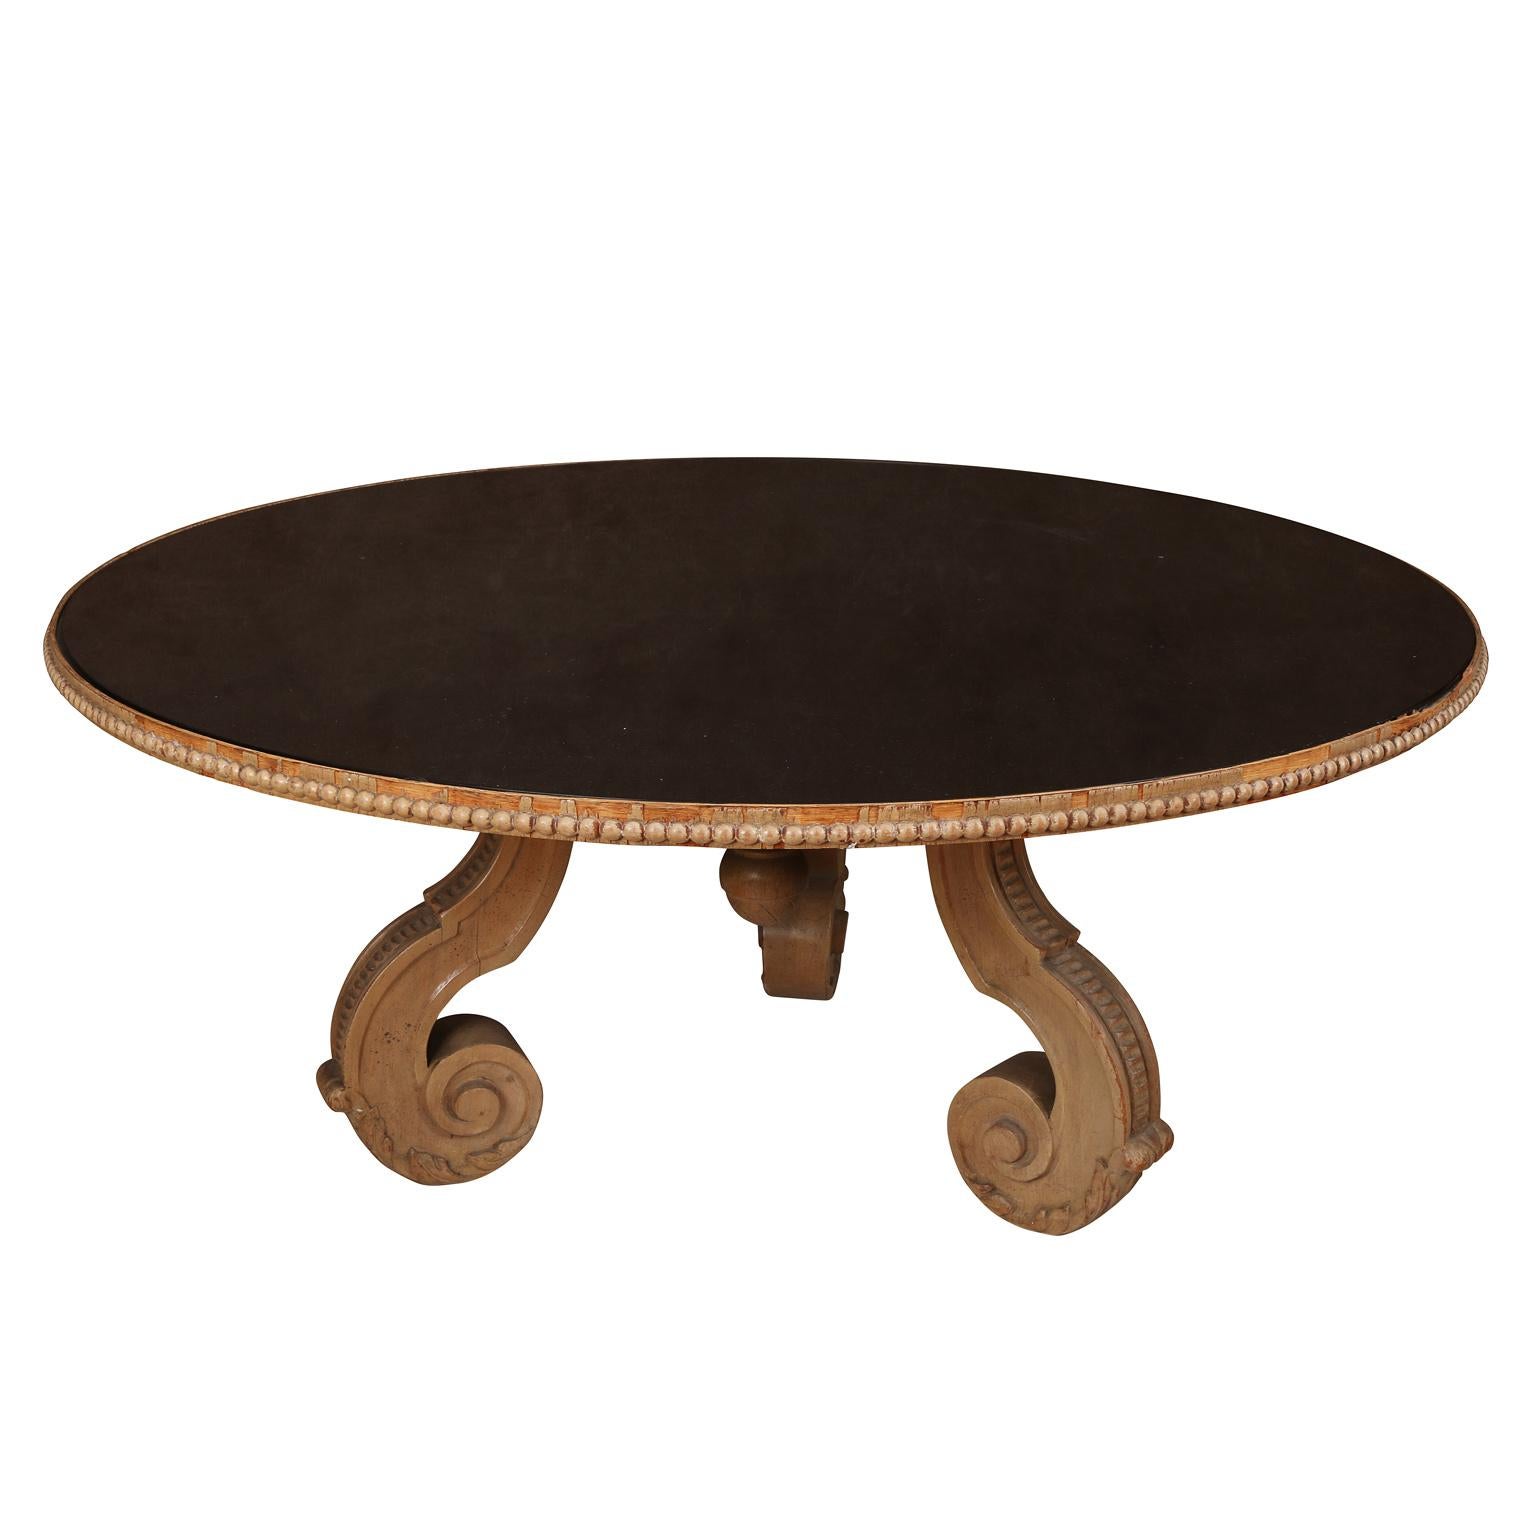 A beautiful and super chic vintage round coffee table with black mirrored top and carved wood base with Serge Roche inspired detail.